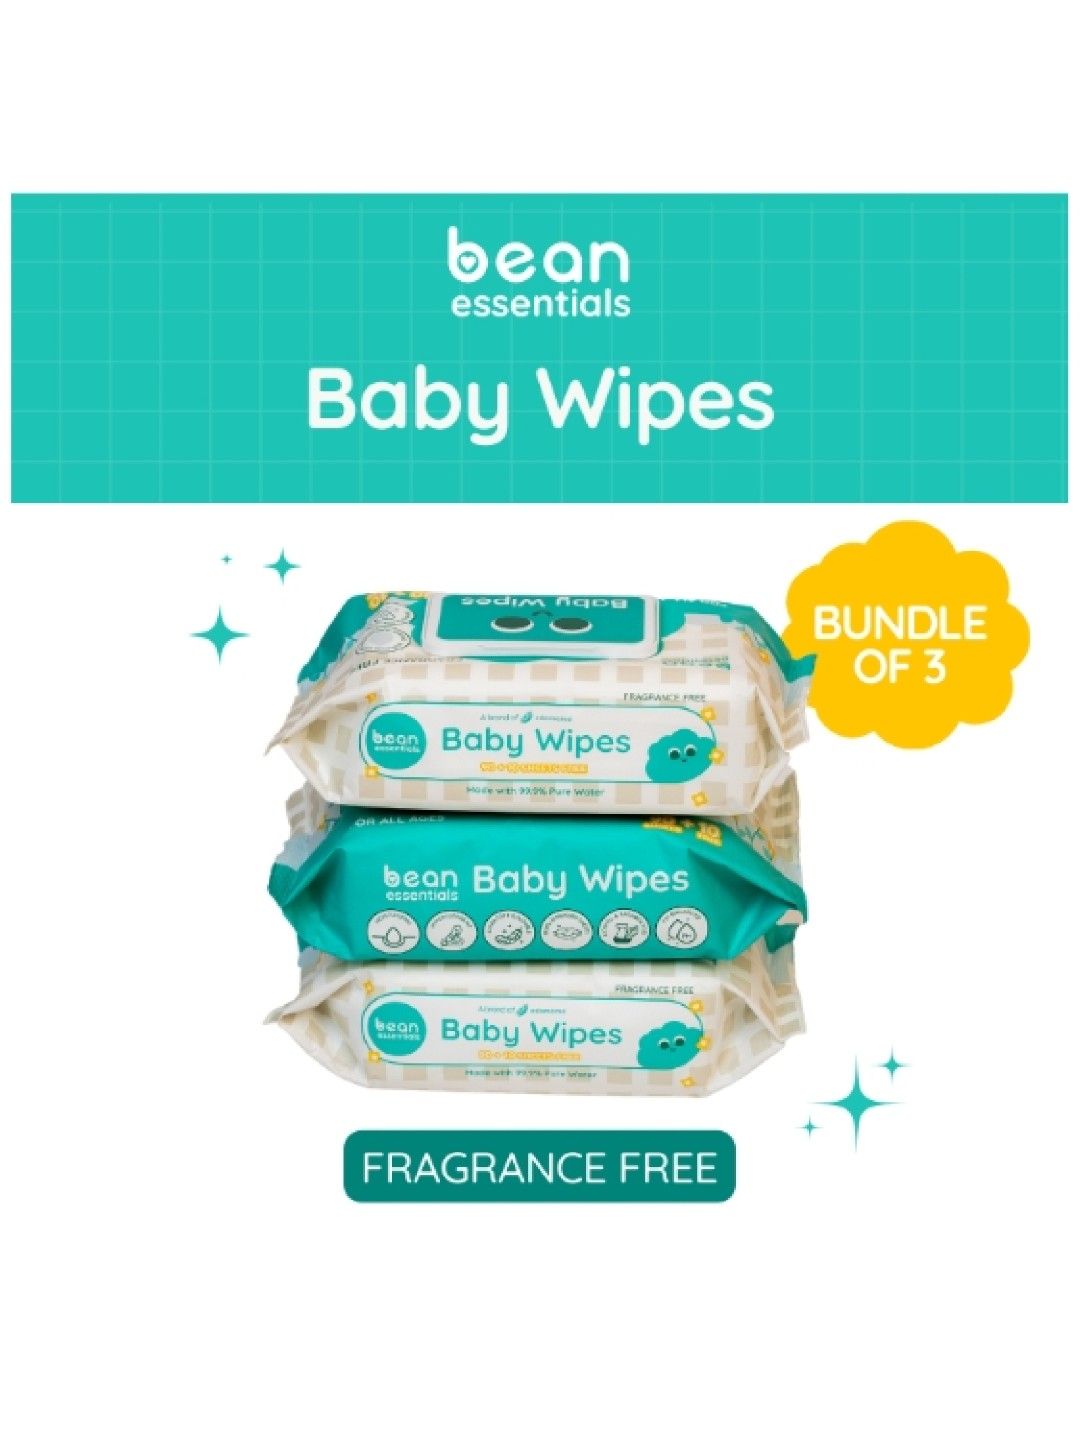 bean essentials [Bundle of 3] Baby Wipes Fragrance Free 3 x 100 sheets (No Color- Image 1)